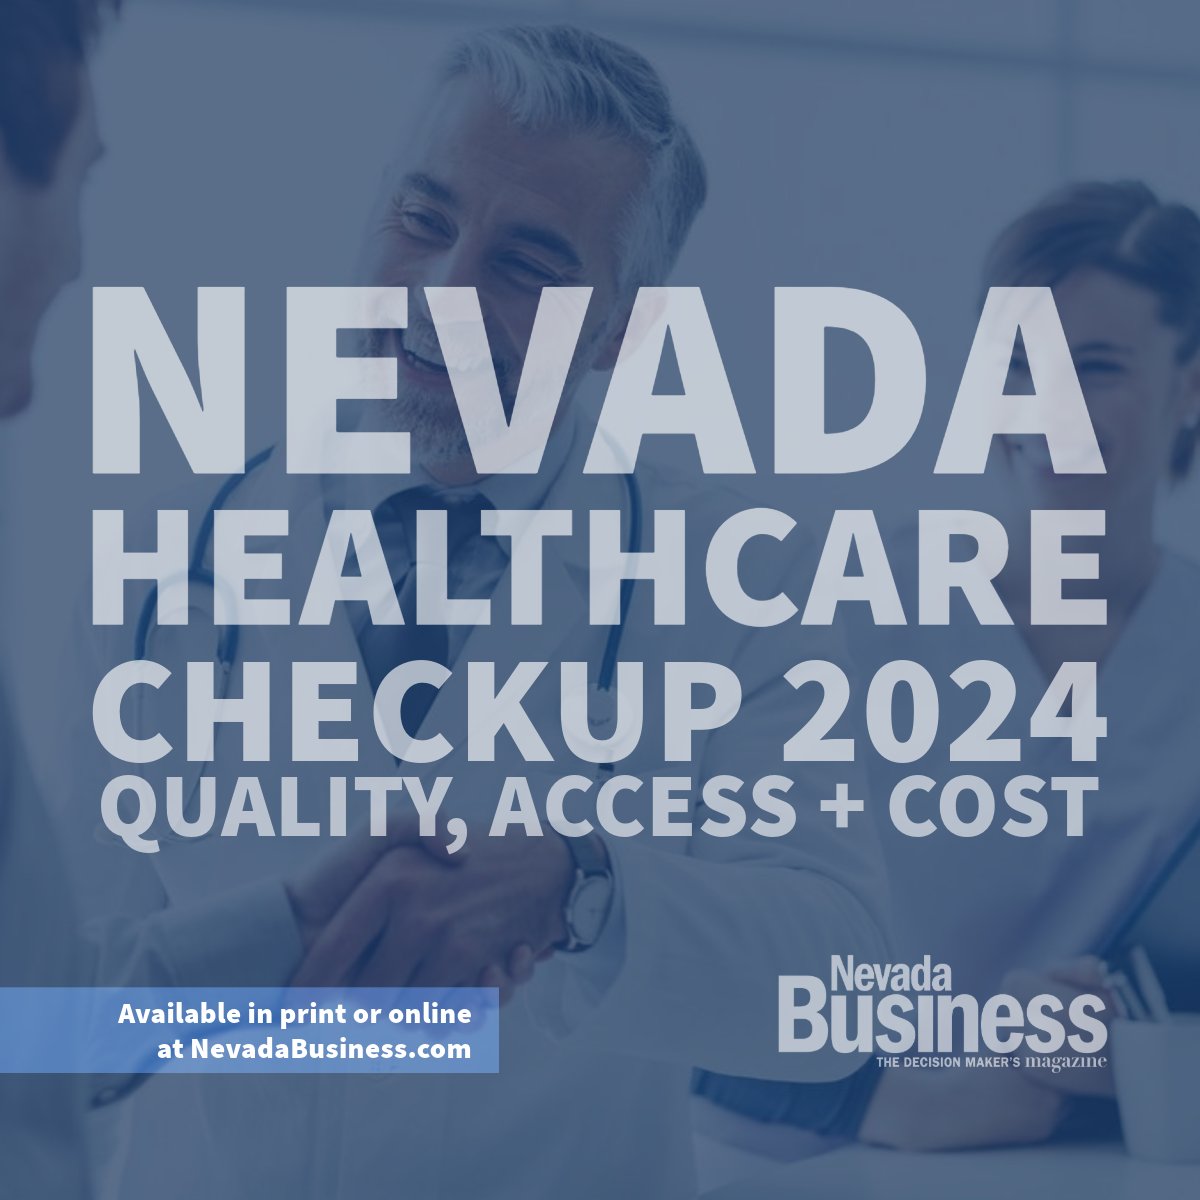 Read about healthcare in Nevada in this month's cover story. Available in print or online at NevadaBusiness.com